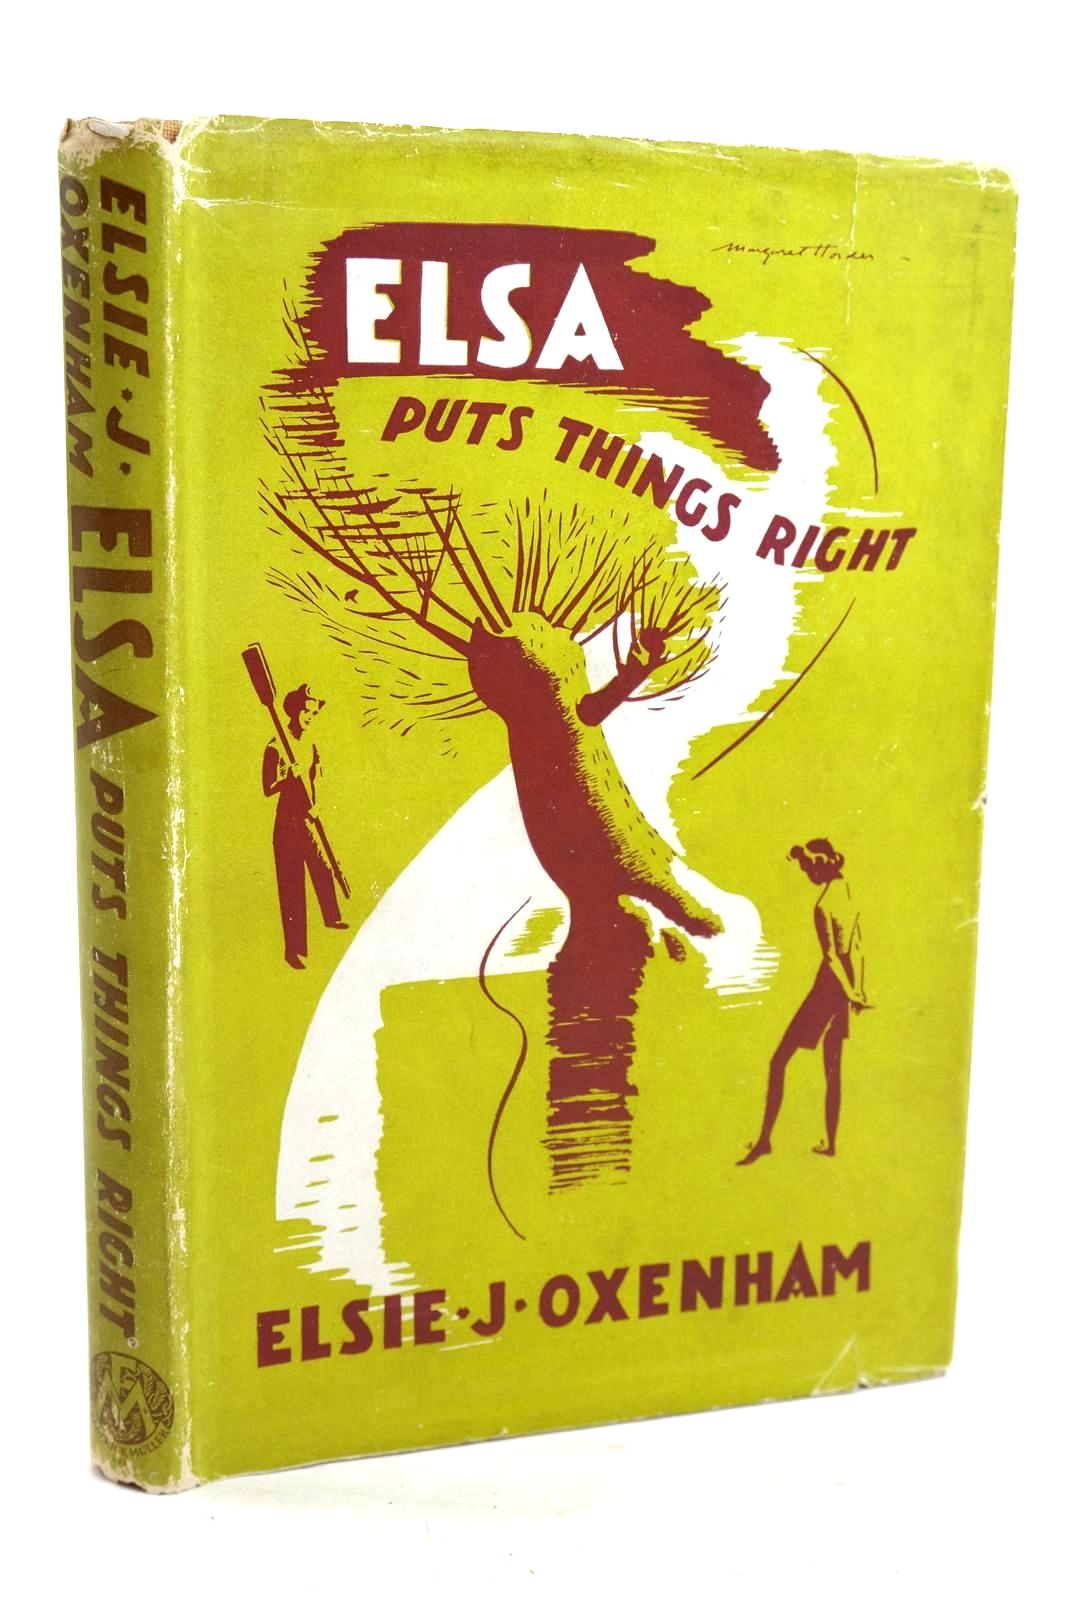 Photo of ELSA PUTS THINGS RIGHT written by Oxenham, Elsie J. illustrated by Horder, Margaret published by Frederick Muller Ltd. (STOCK CODE: 1319754)  for sale by Stella & Rose's Books